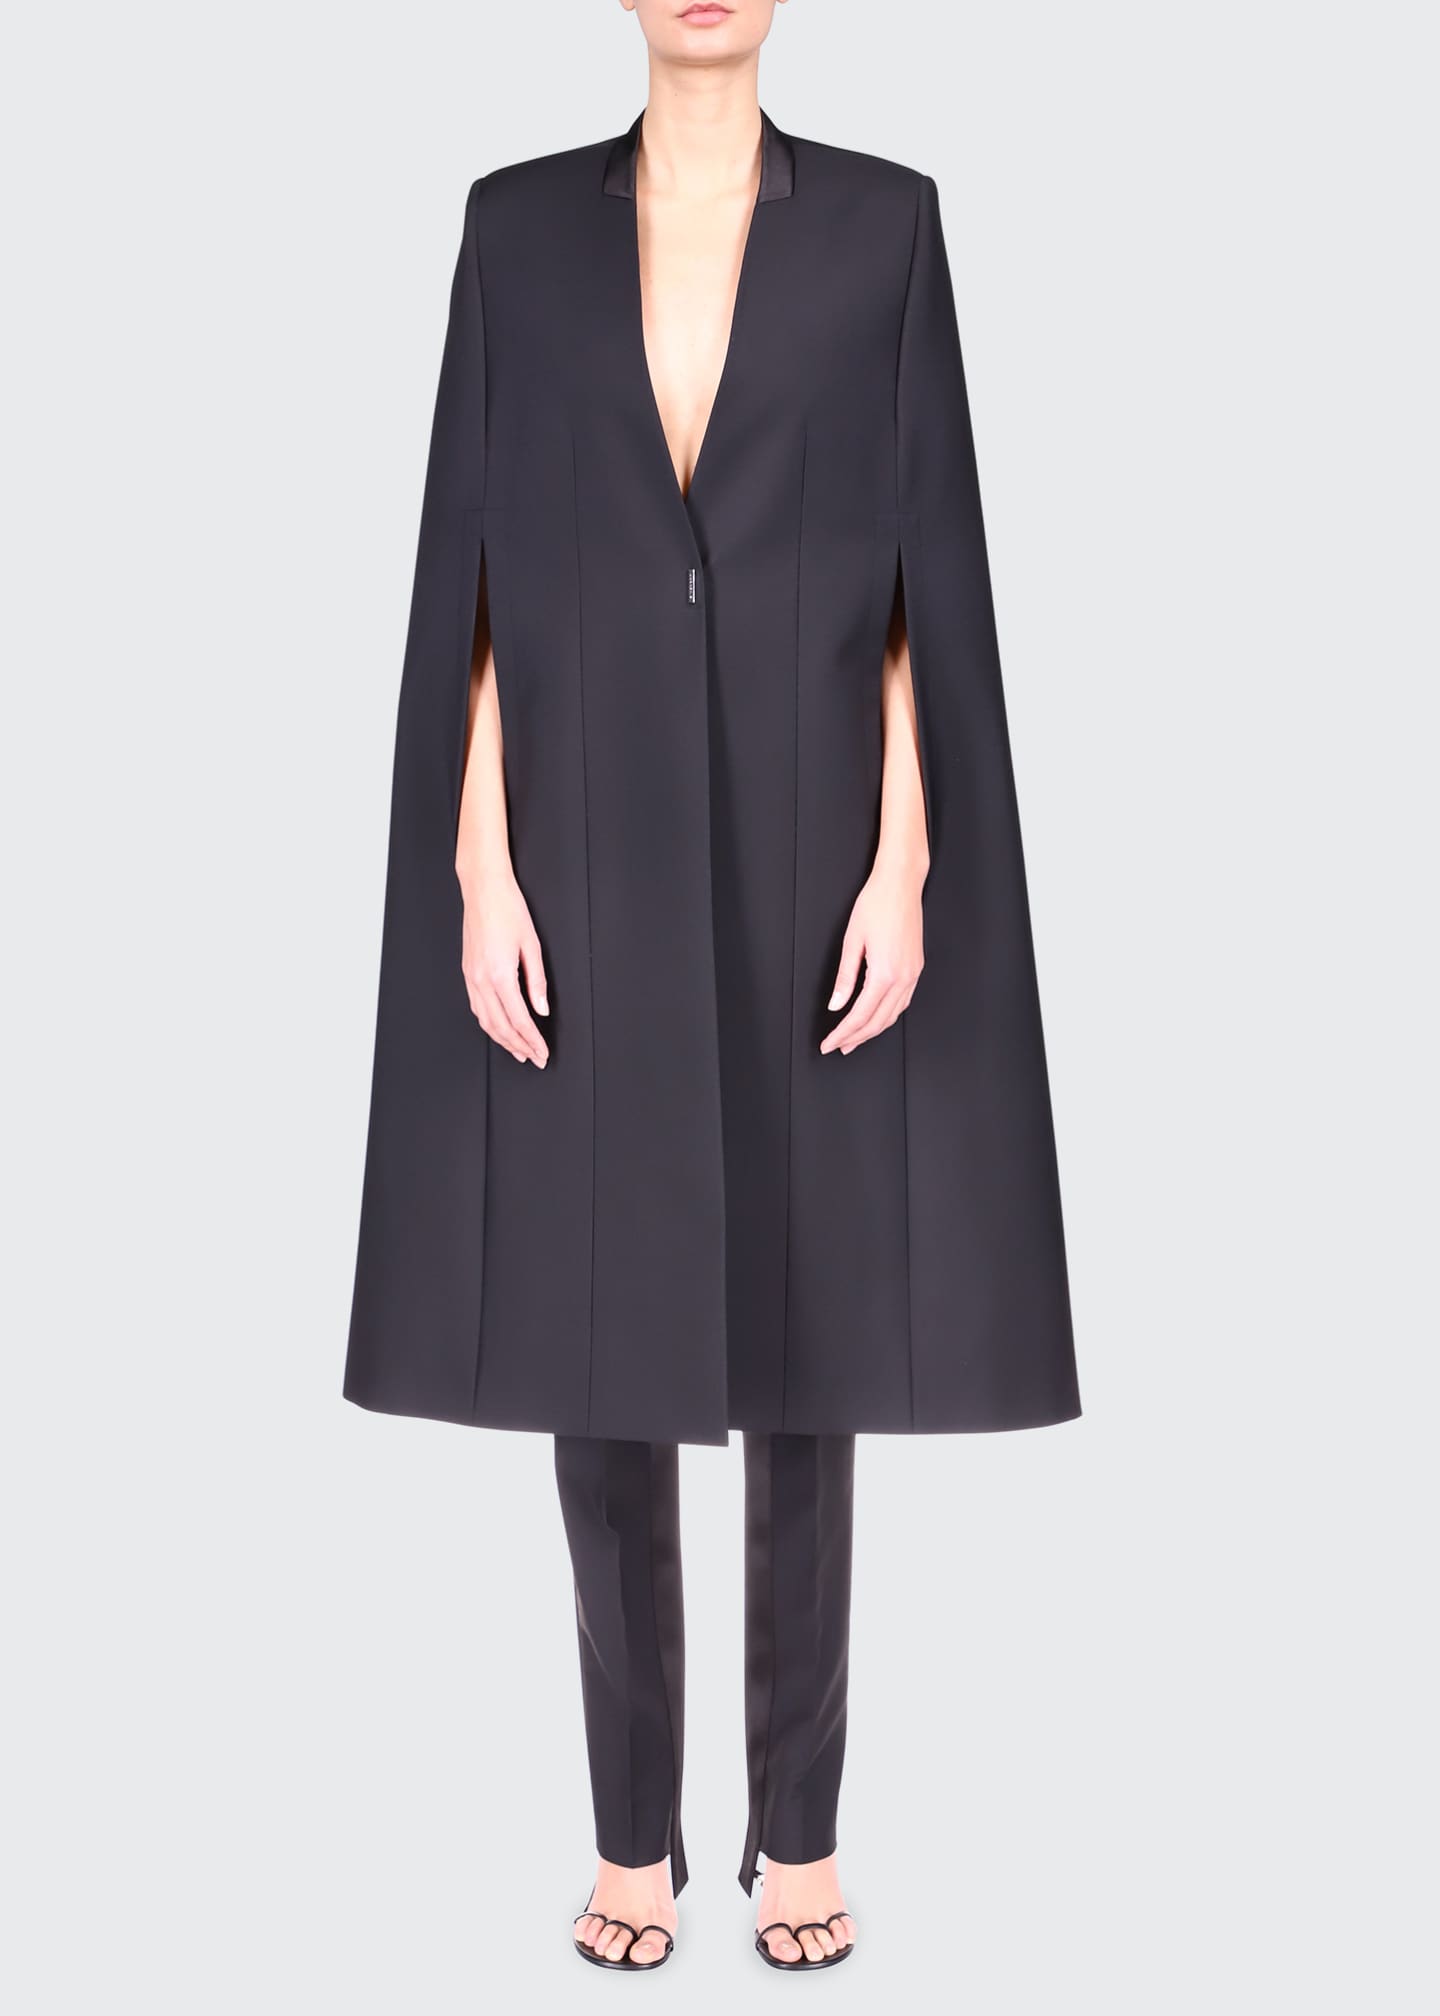 Givenchy Long Tailored Wool-Mohair Cape Coat - Bergdorf Goodman